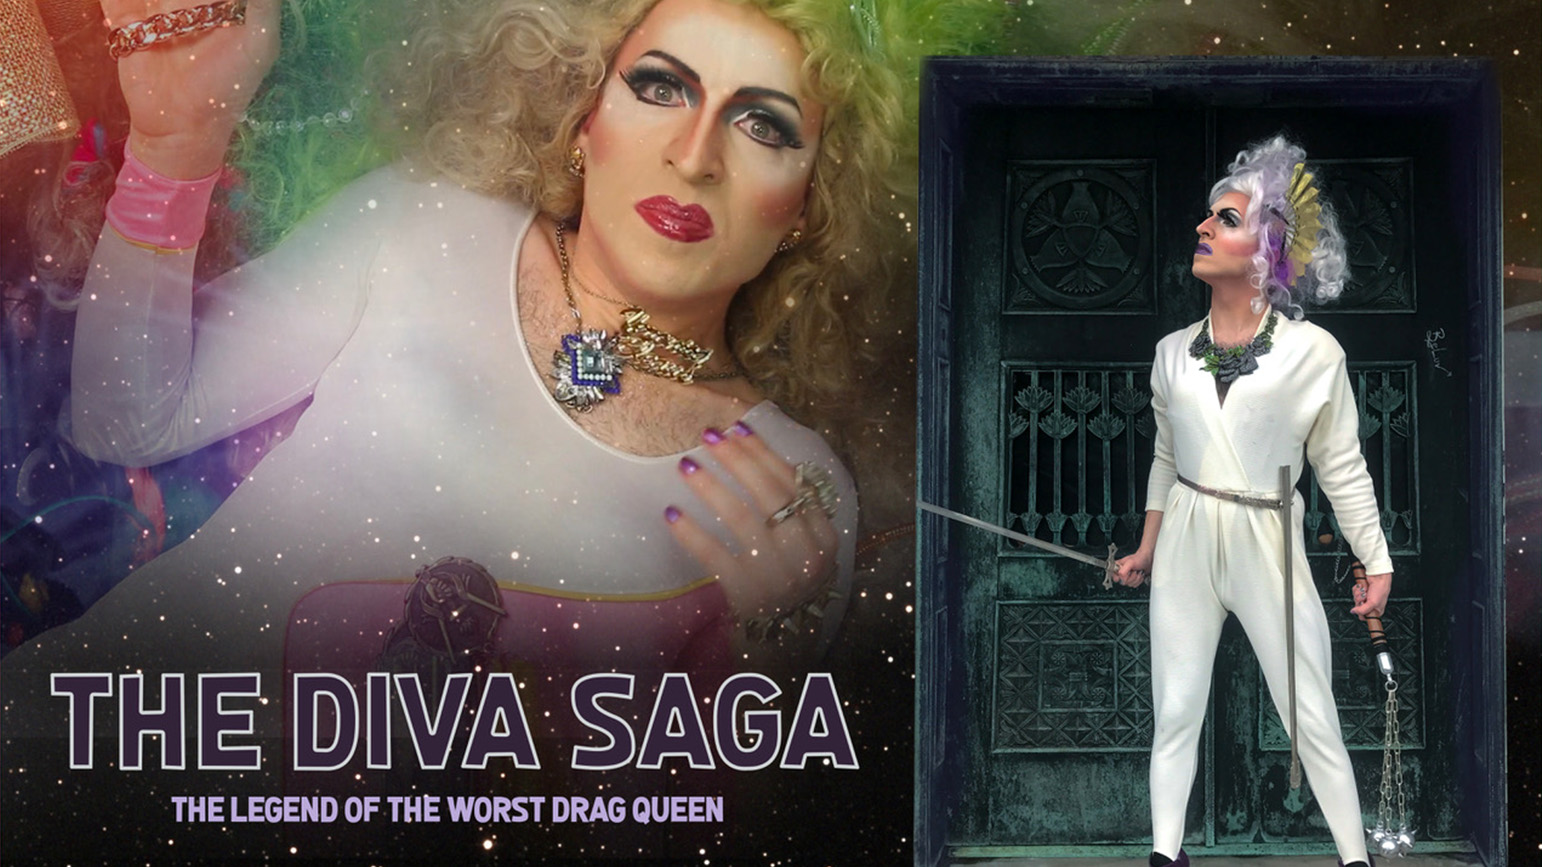 Two images of a very serious looking drag queen with the text "The Diva Saga / The Legend of the Worst Drag Queen"